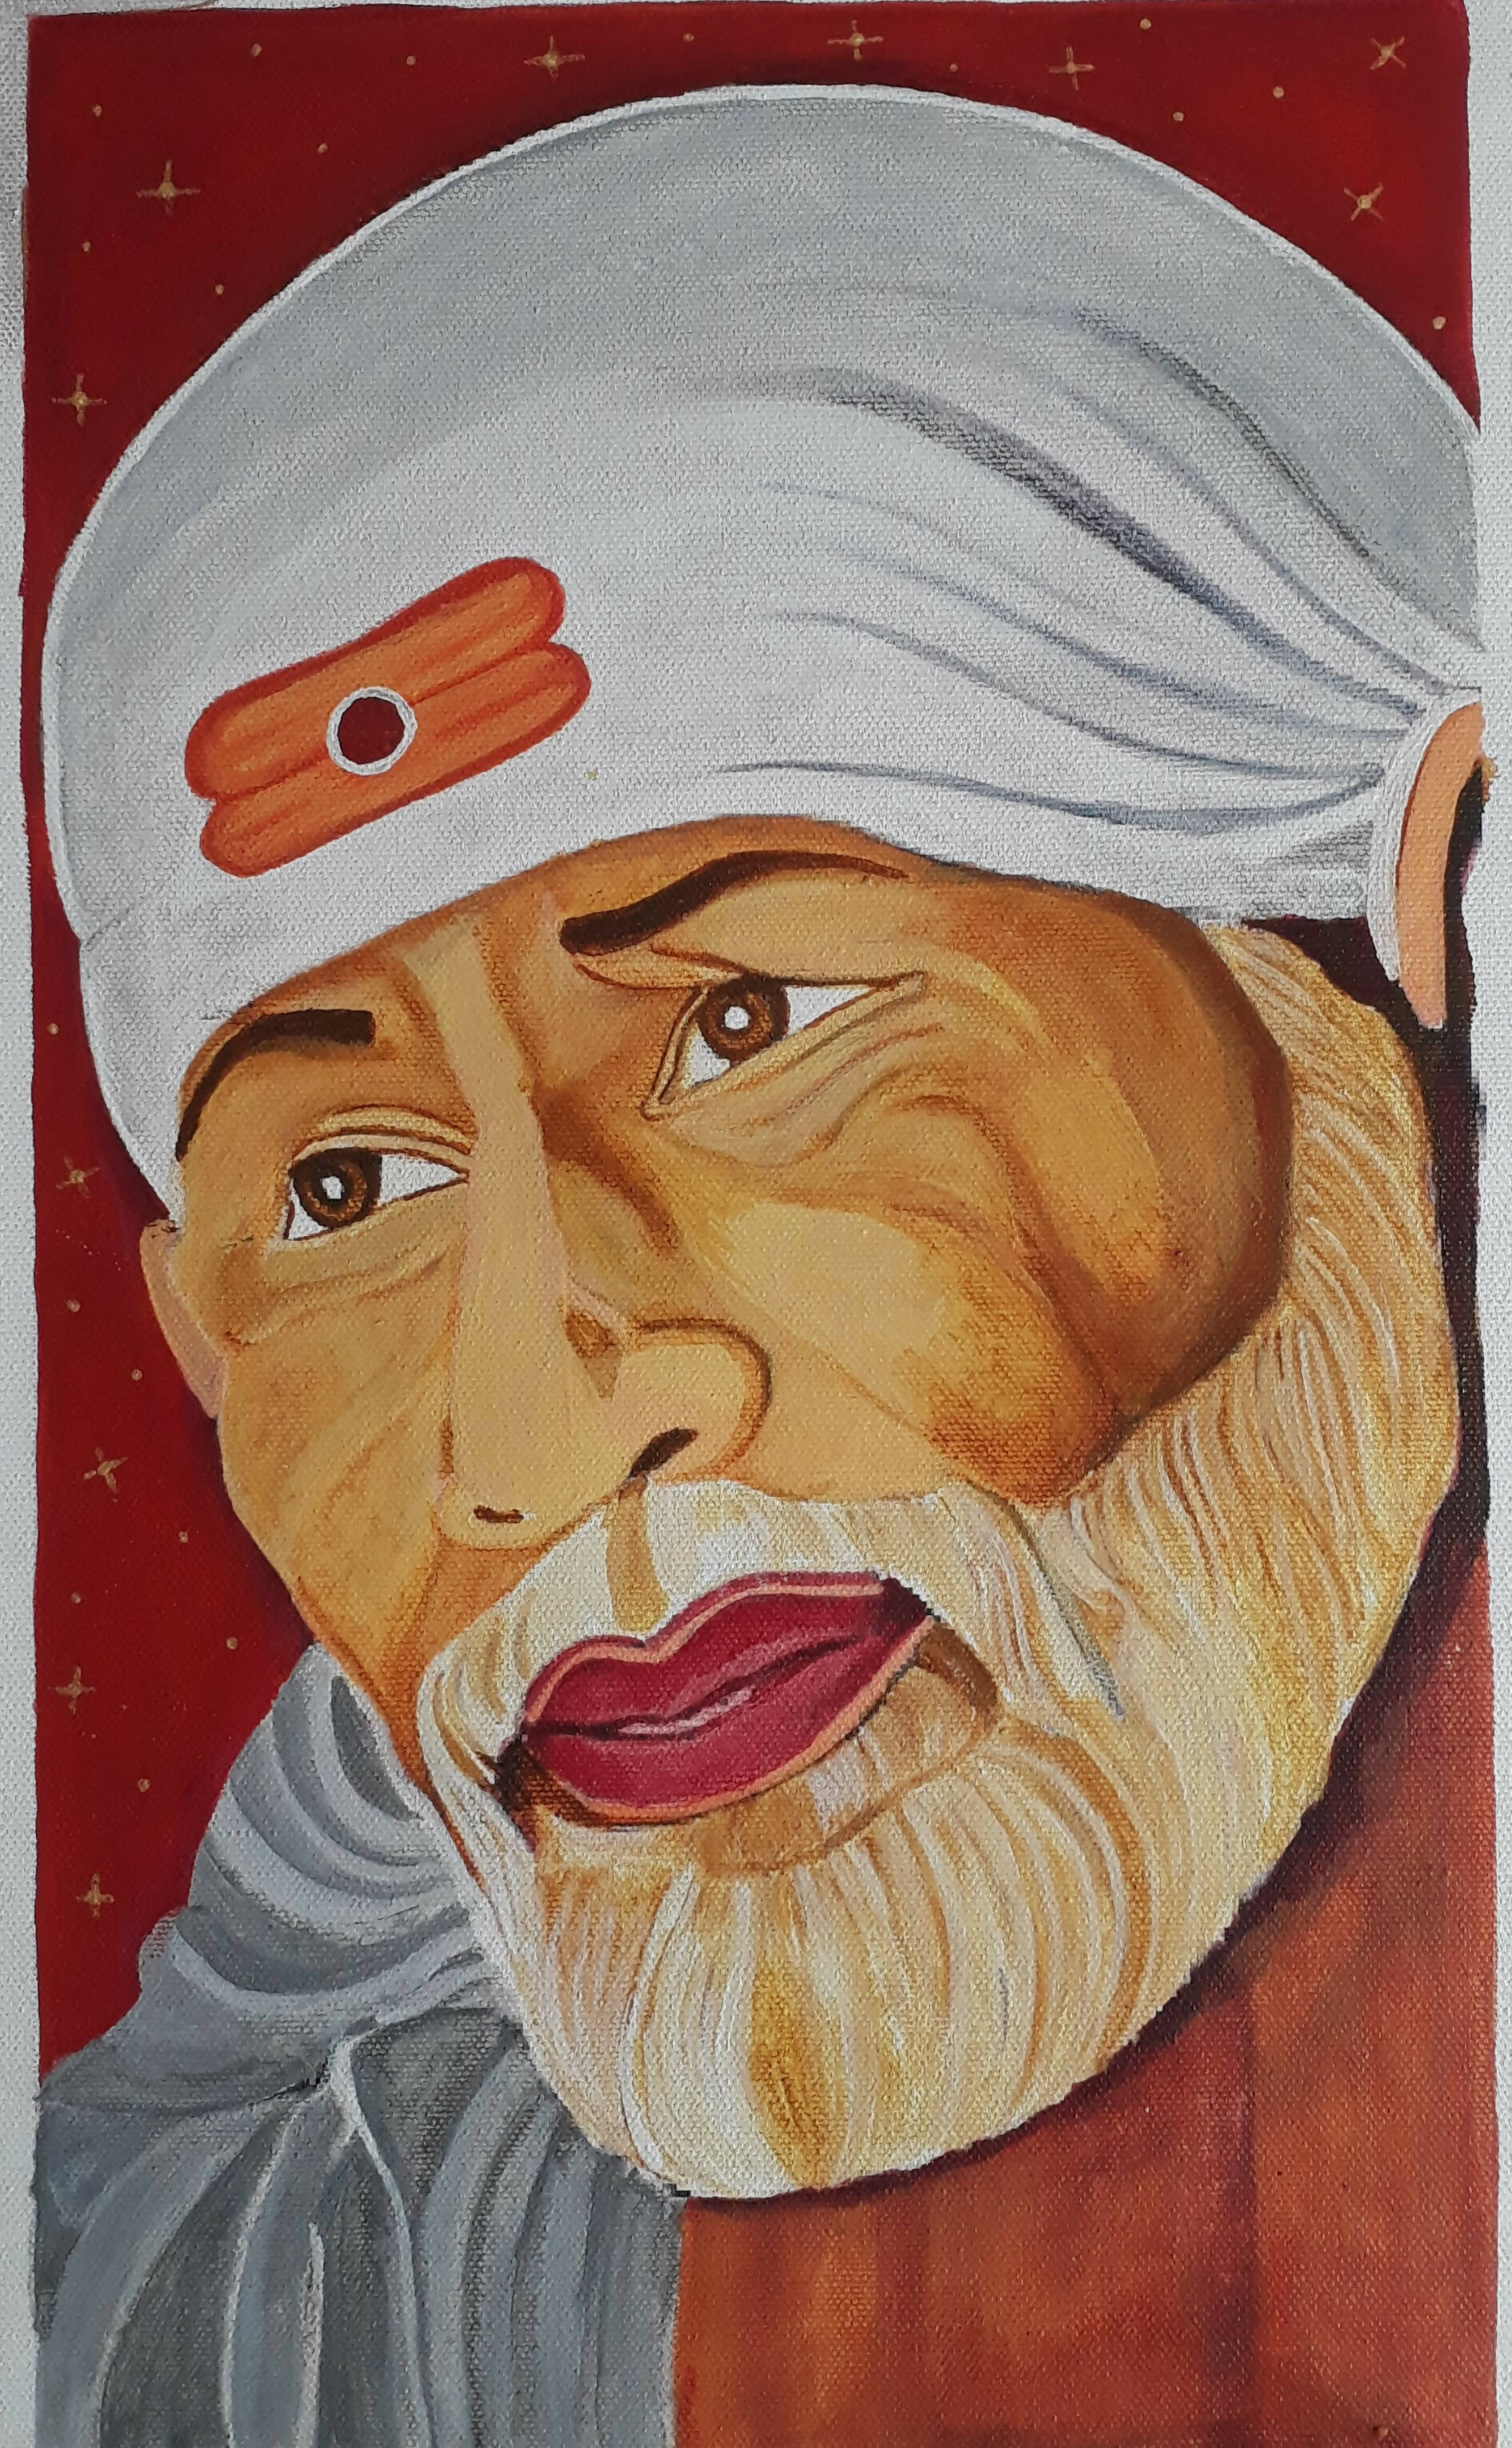 Sai Baba Pencil Sketching Services at best price in Bhopal